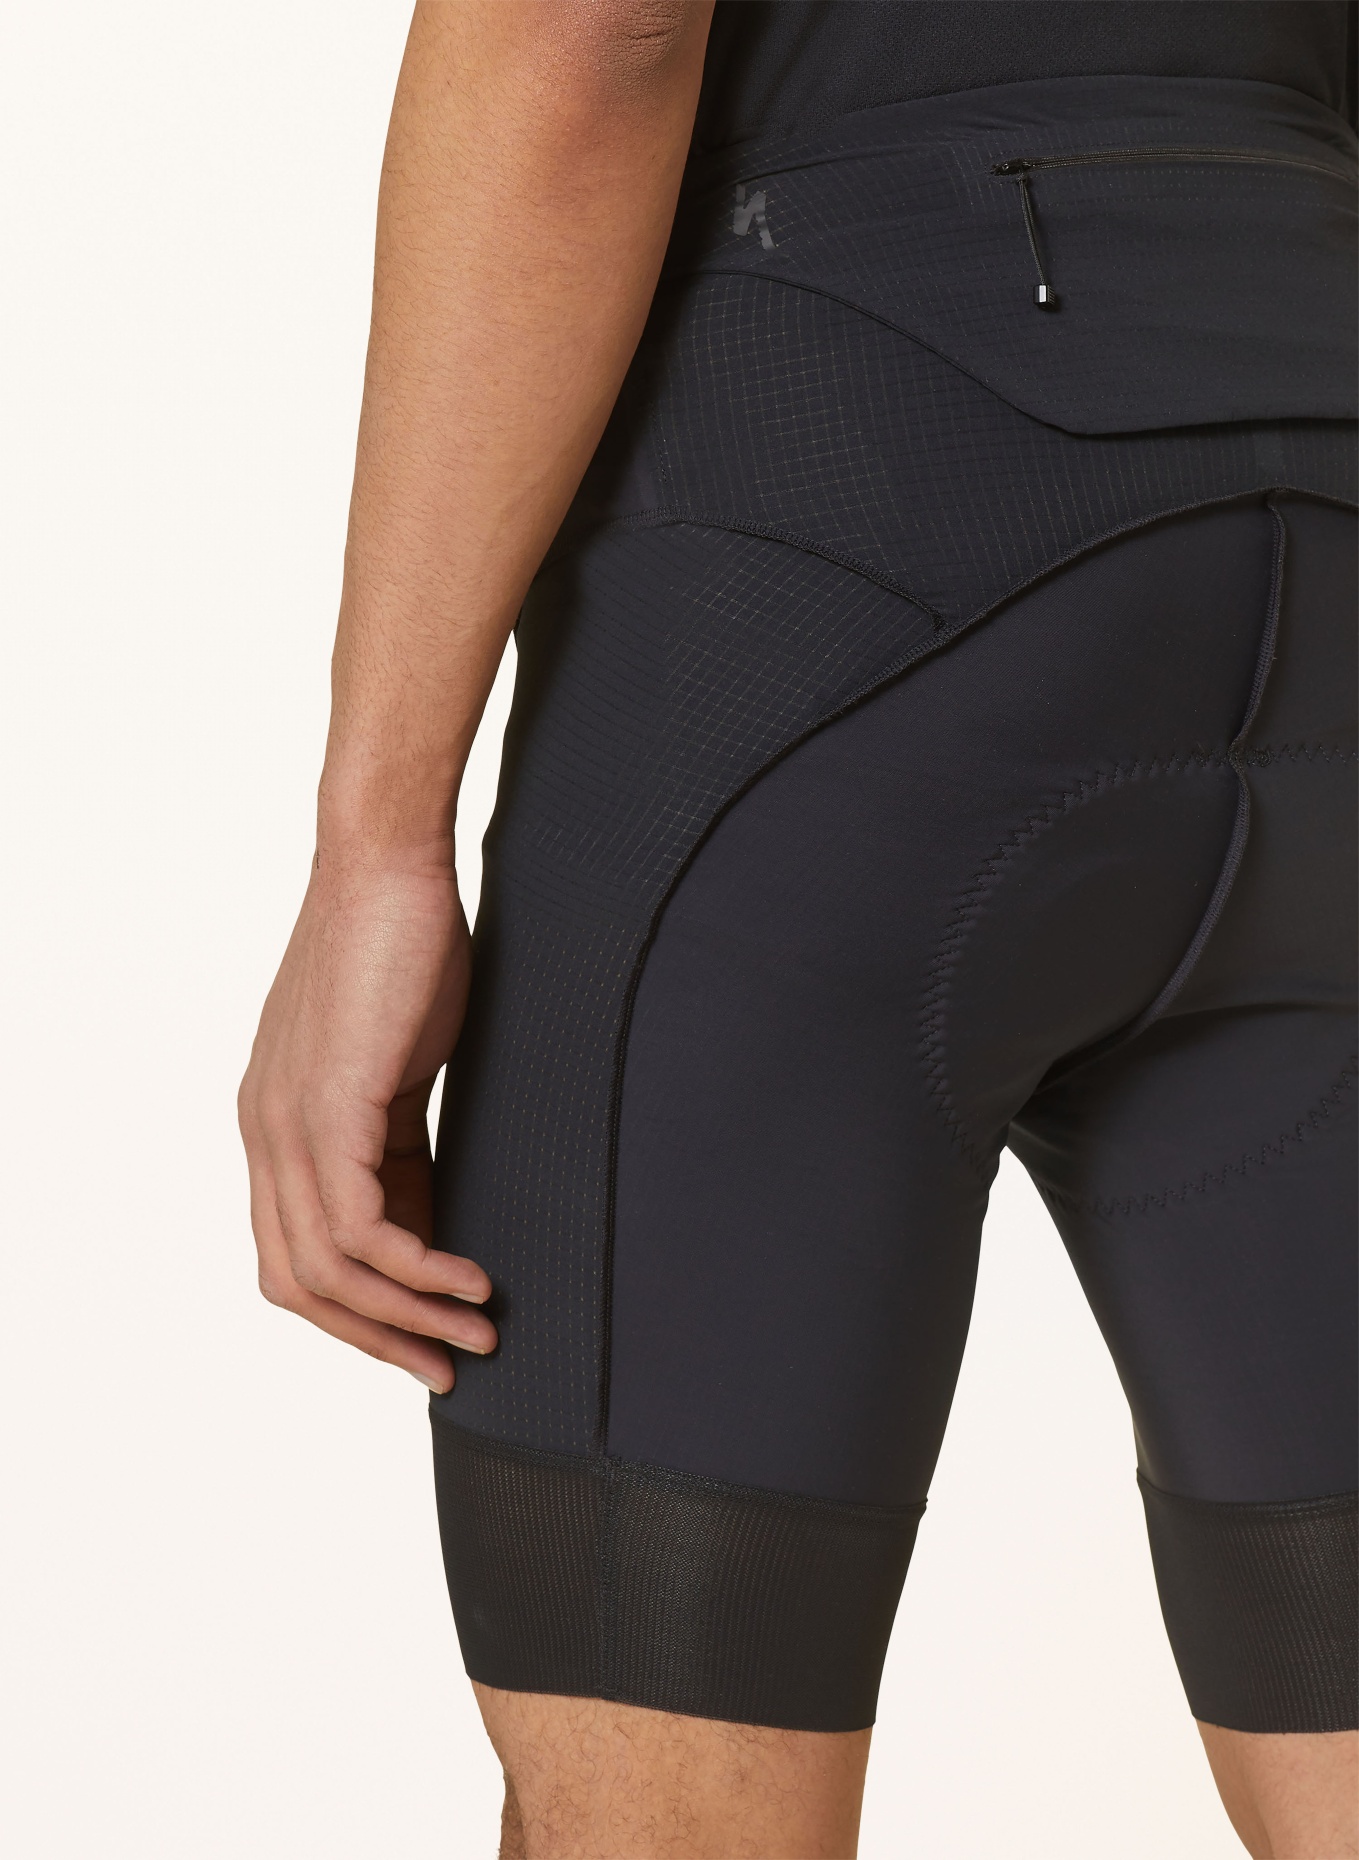 SPECIALIZED Cycling undershorts PRIME SWAT LINER with padded insert, Color: BLACK (Image 6)